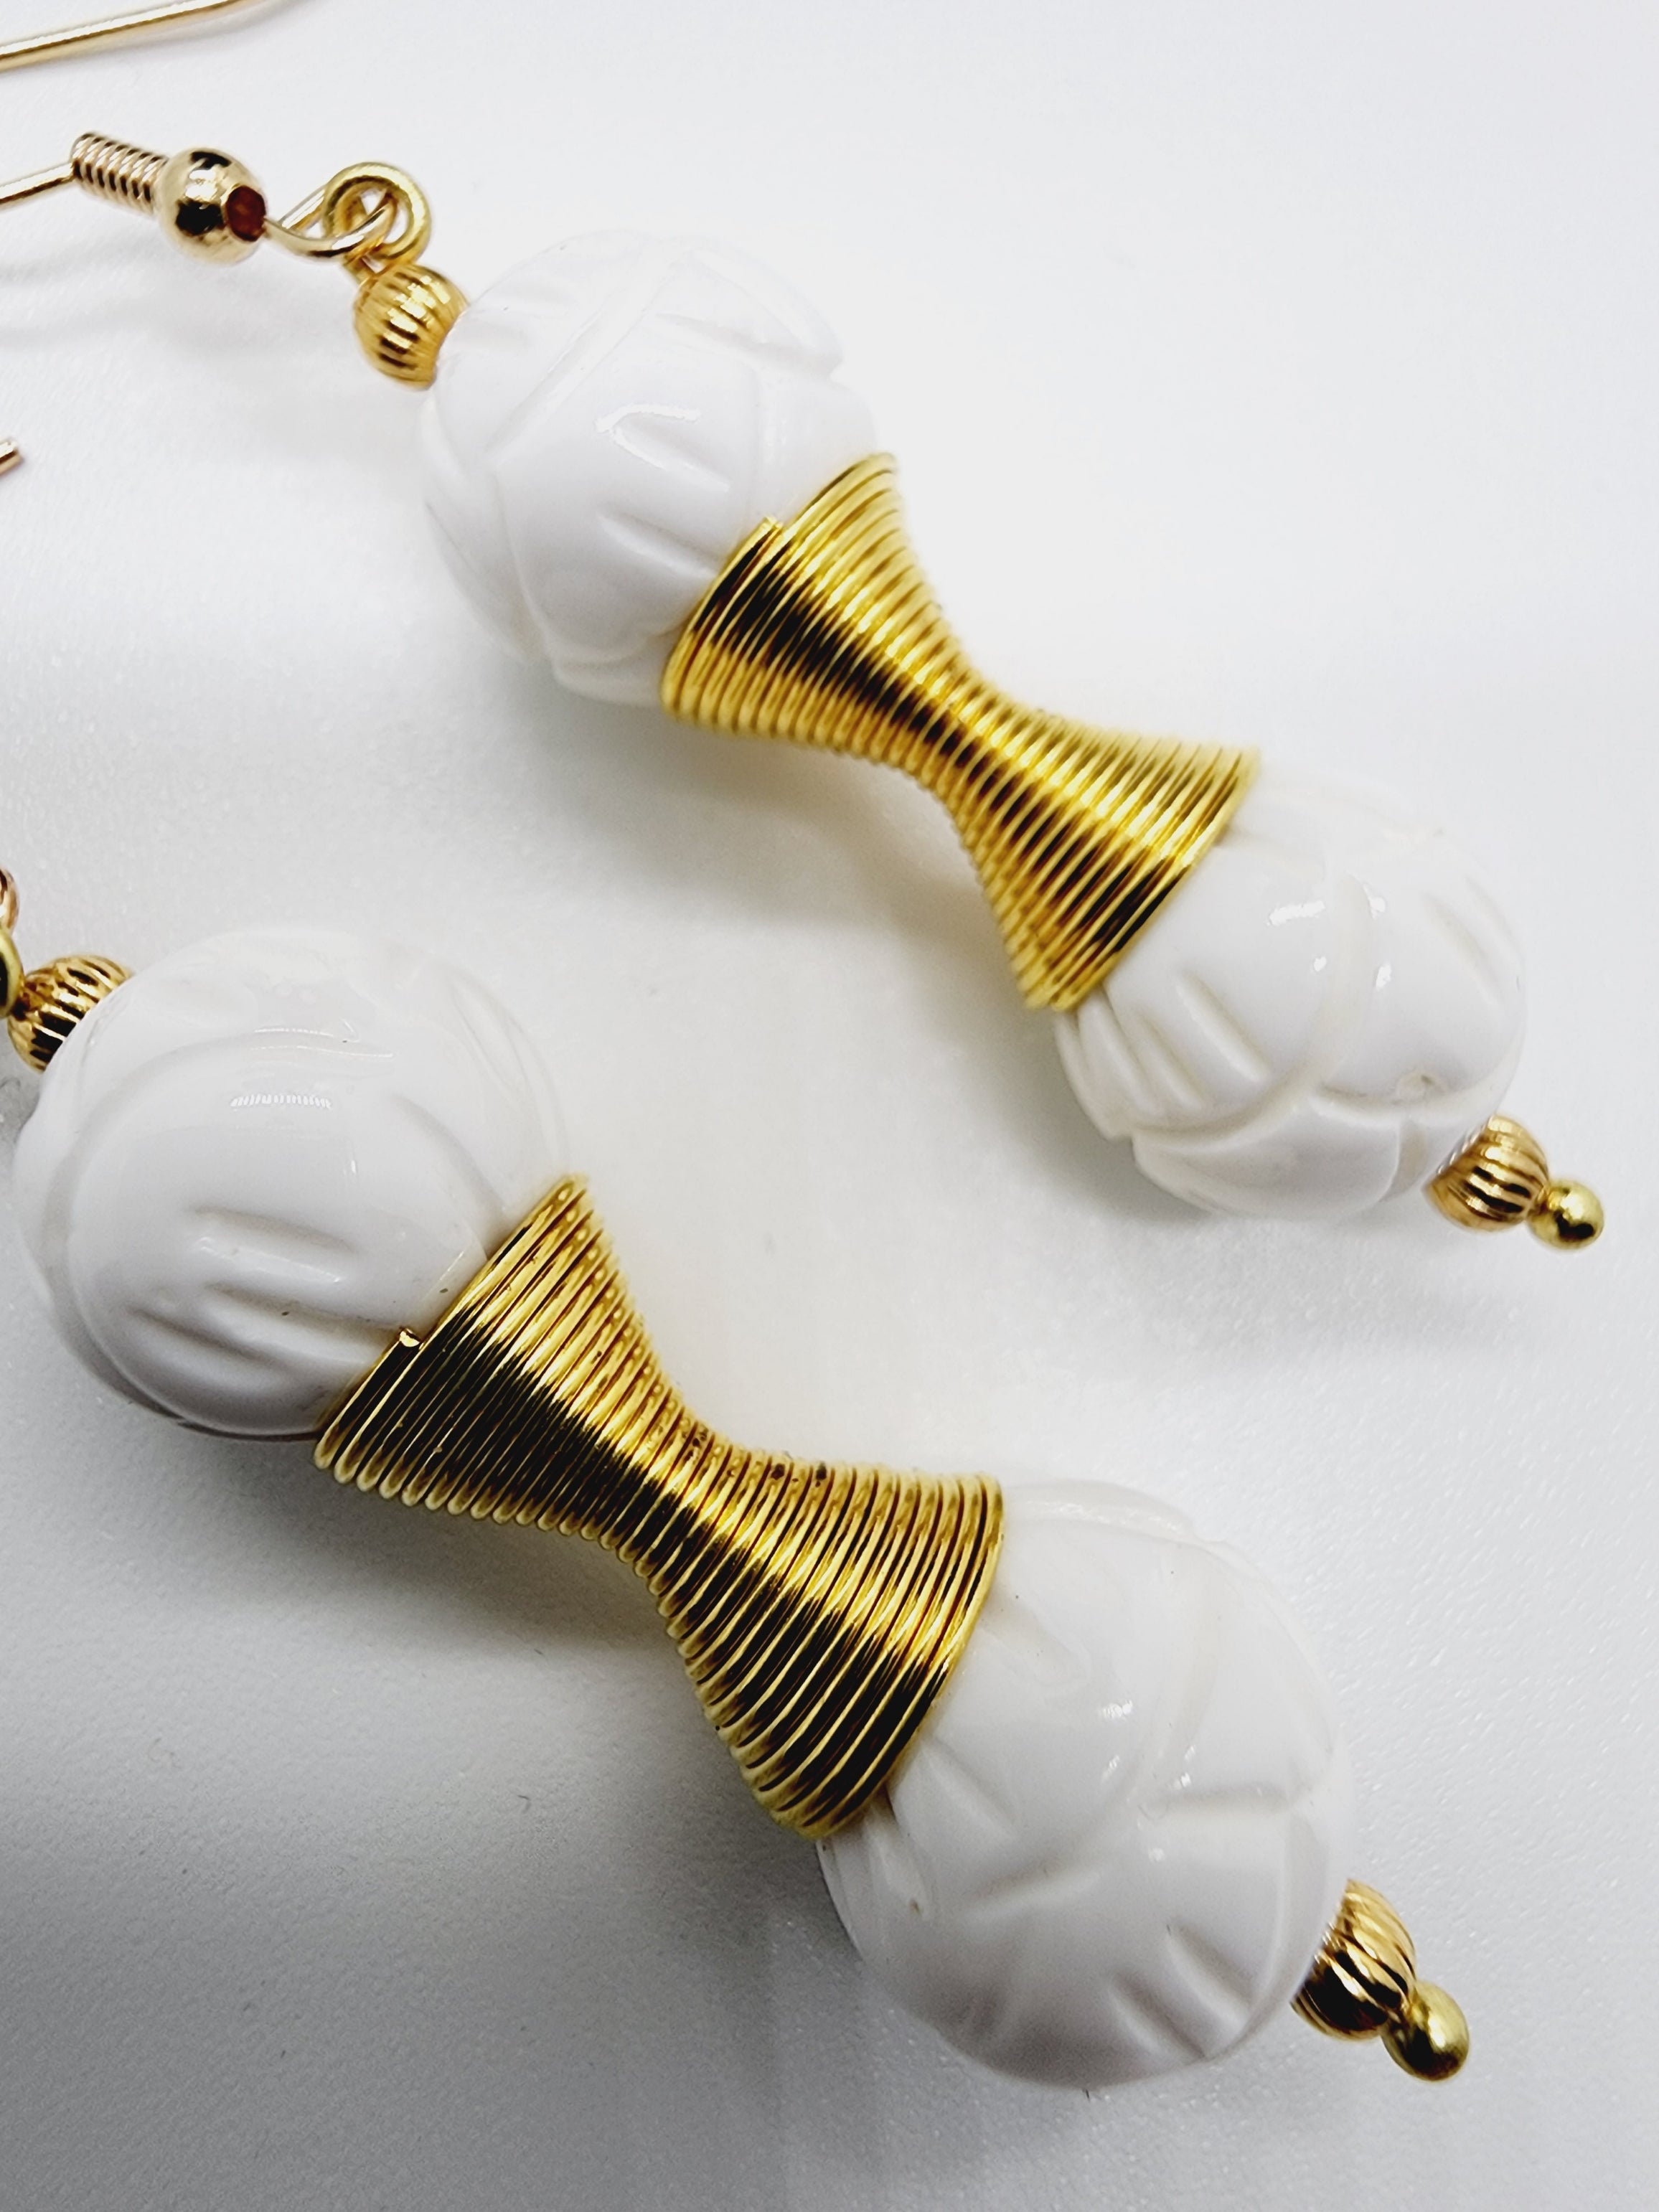 Length: 2 inches | Weight: 0.4 ounces  Distinctly You! These handmade earrings are made using 12mm carved white ceramic beads, gold charm double spring, 2mm gold ribbed seed bead, and hypoallergenic hooks with back closures.  